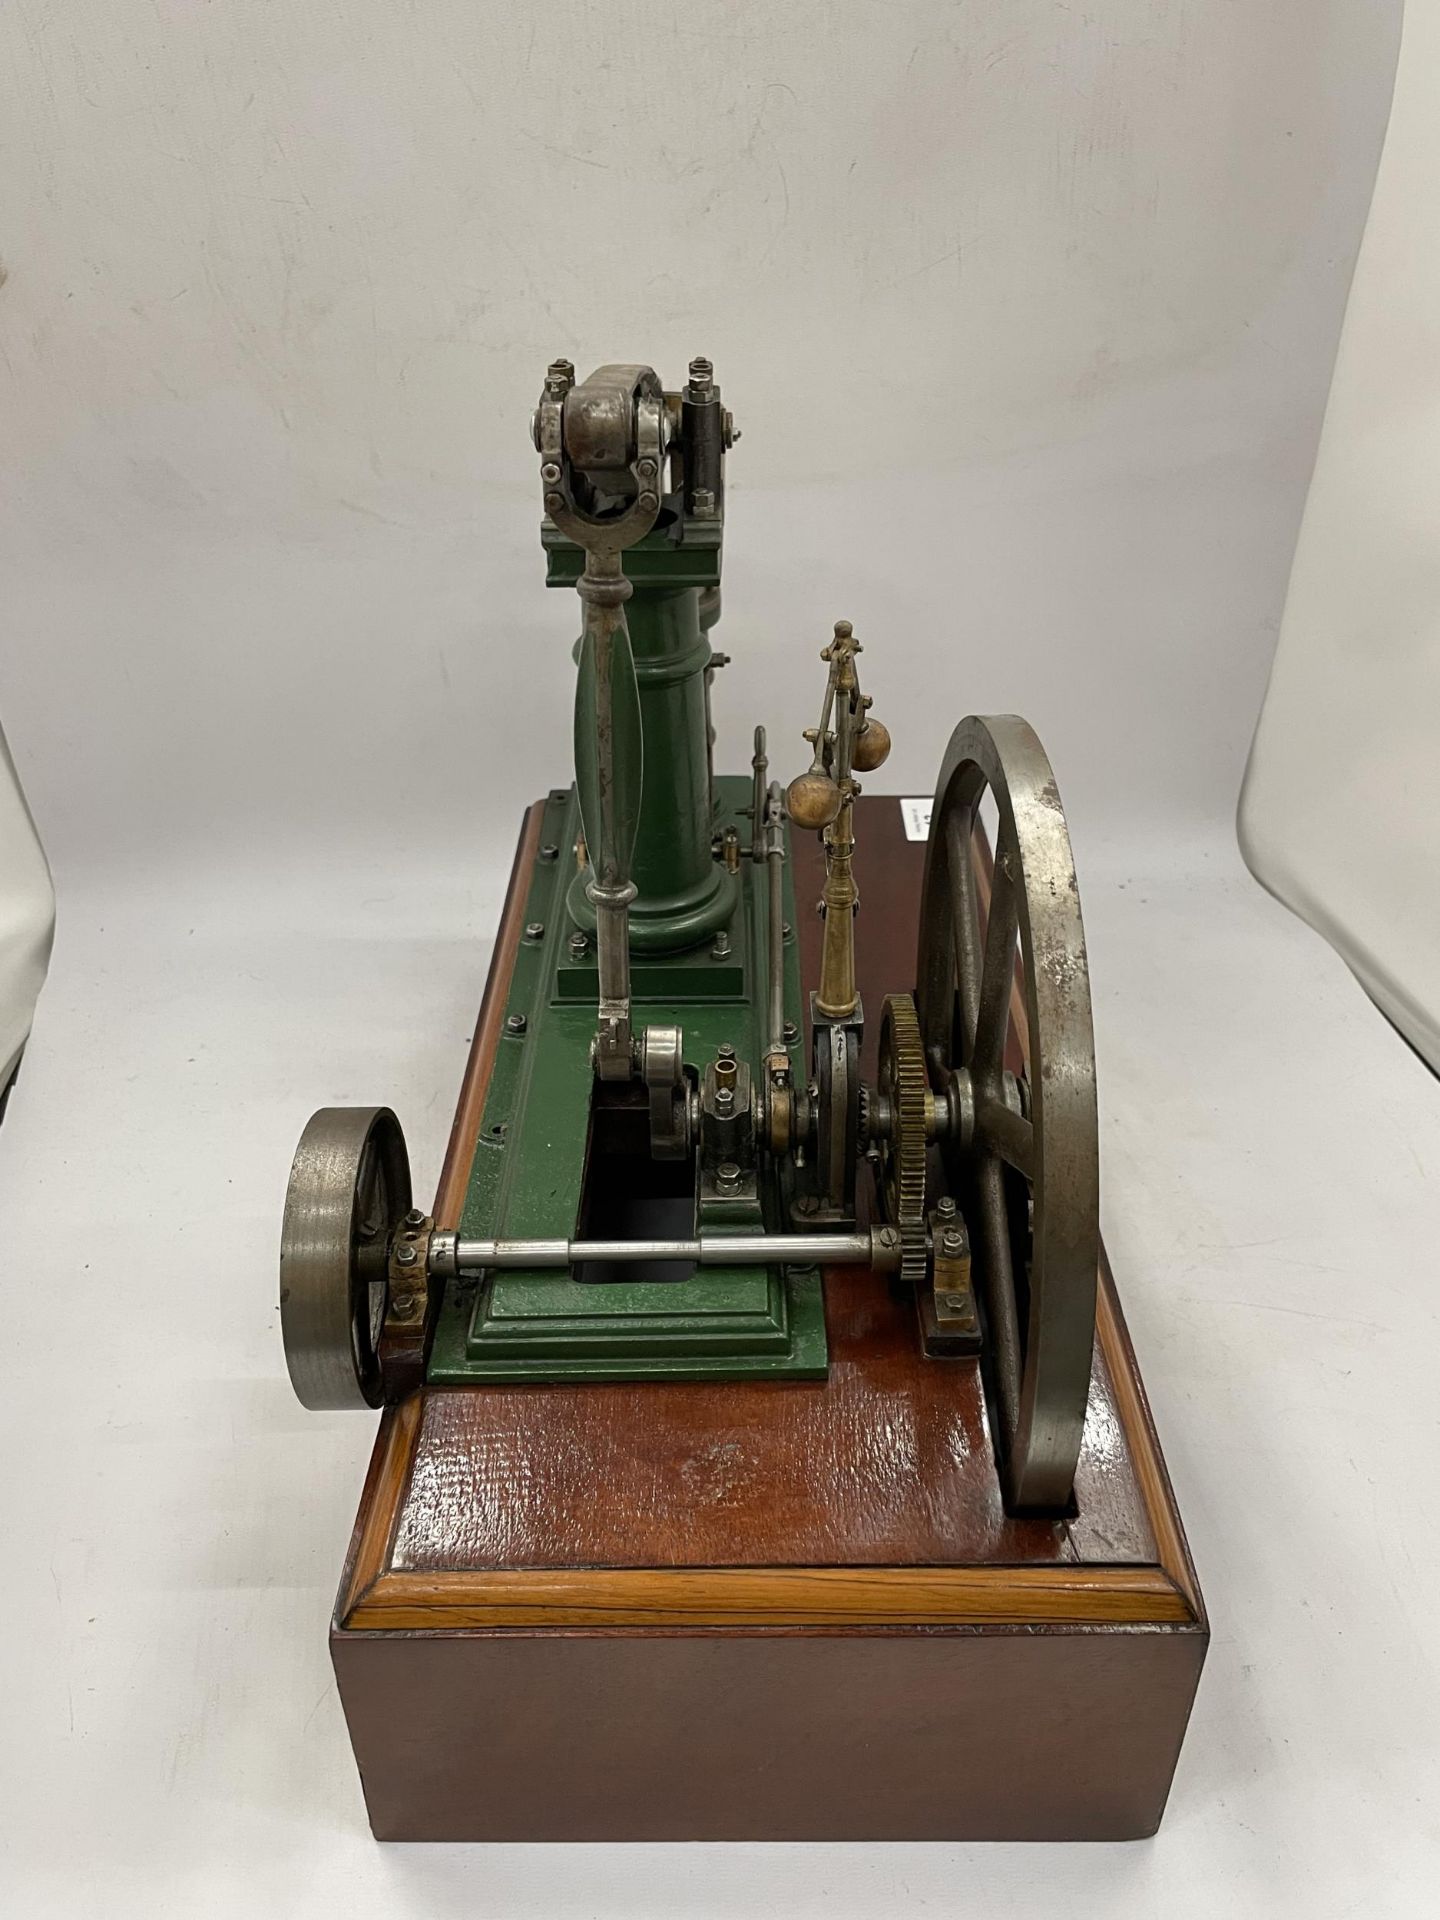 A VINTAGE STATIONARY STEAM ENGINE WHICH CAN RUN OFF COMPRESSED AIR OR STEAM - Image 3 of 6